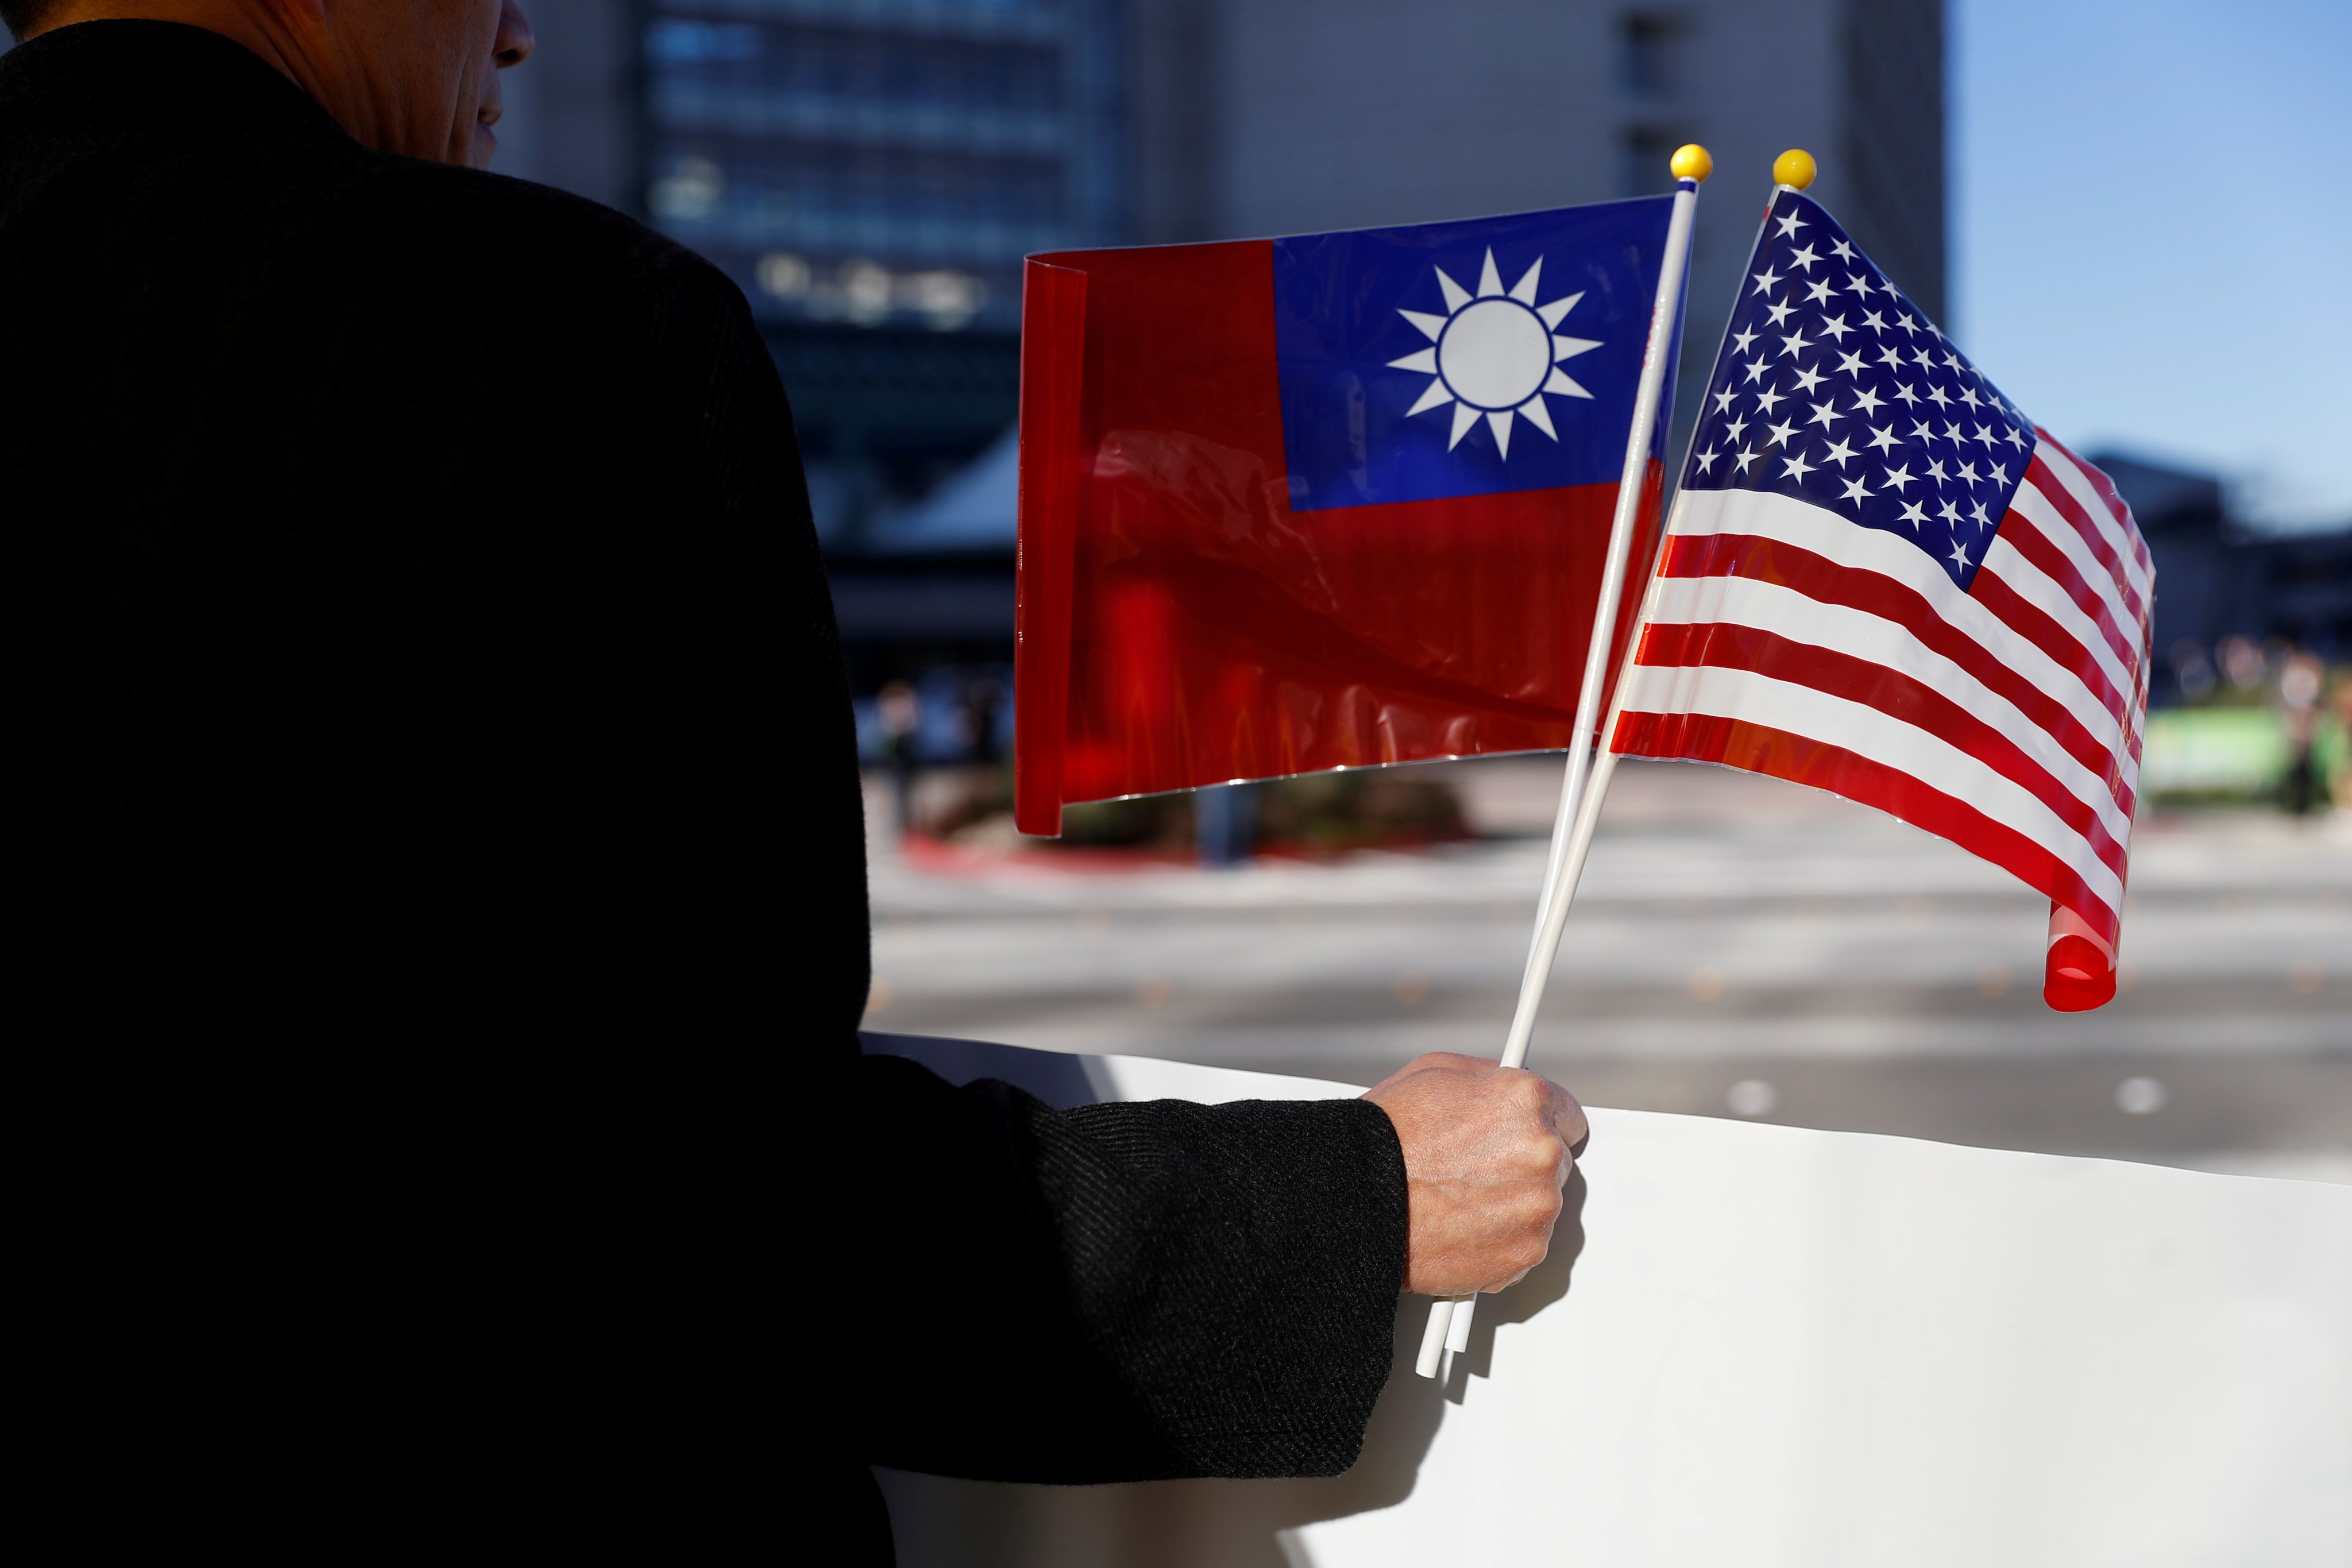 This week’s talks between Taiwan and the United States could open the door to a free-trade pact, which would cut costs for Taiwanese exporters. Photo: Reuters